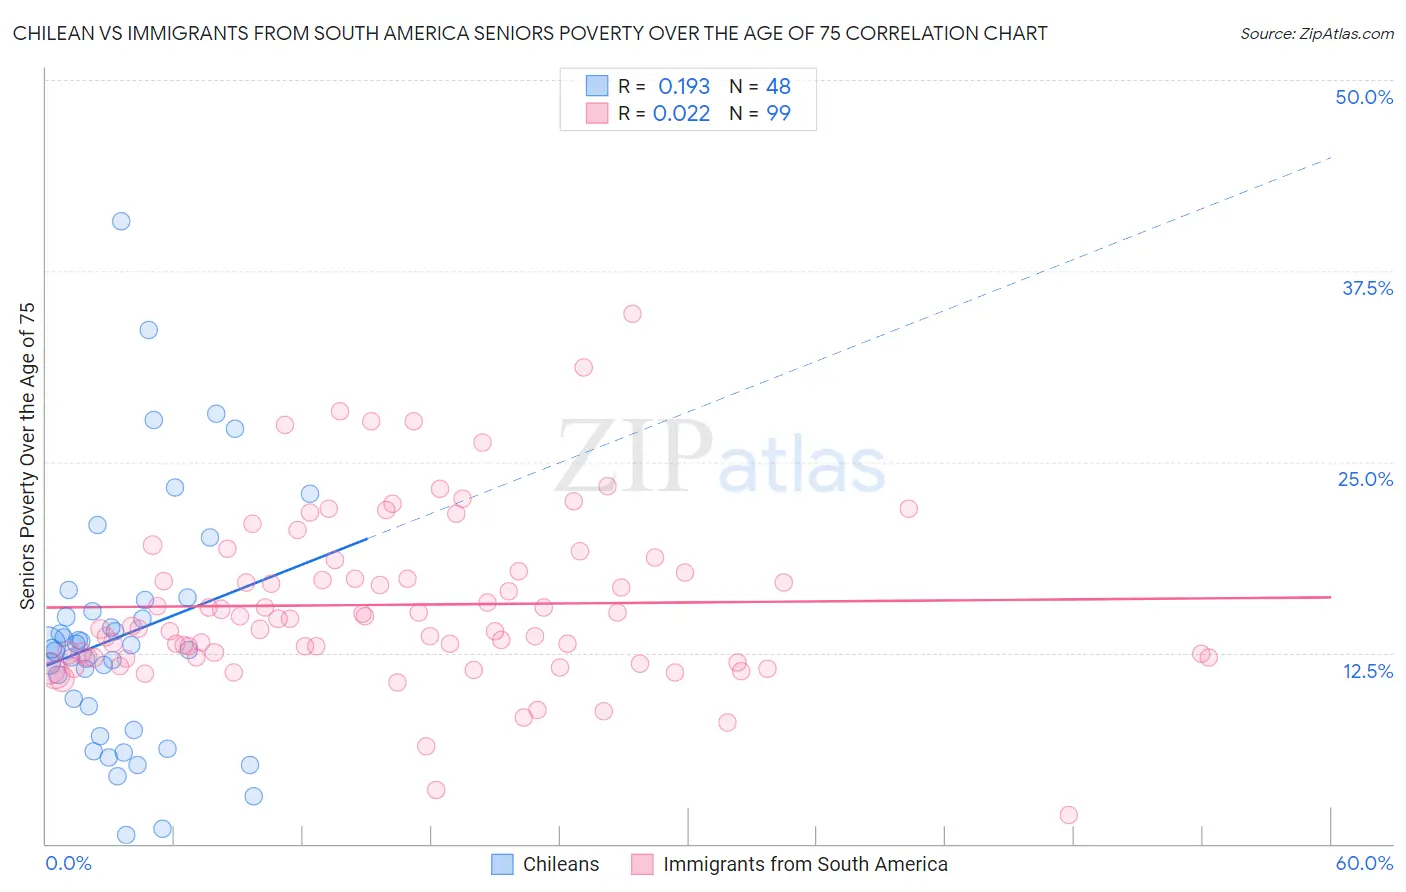 Chilean vs Immigrants from South America Seniors Poverty Over the Age of 75